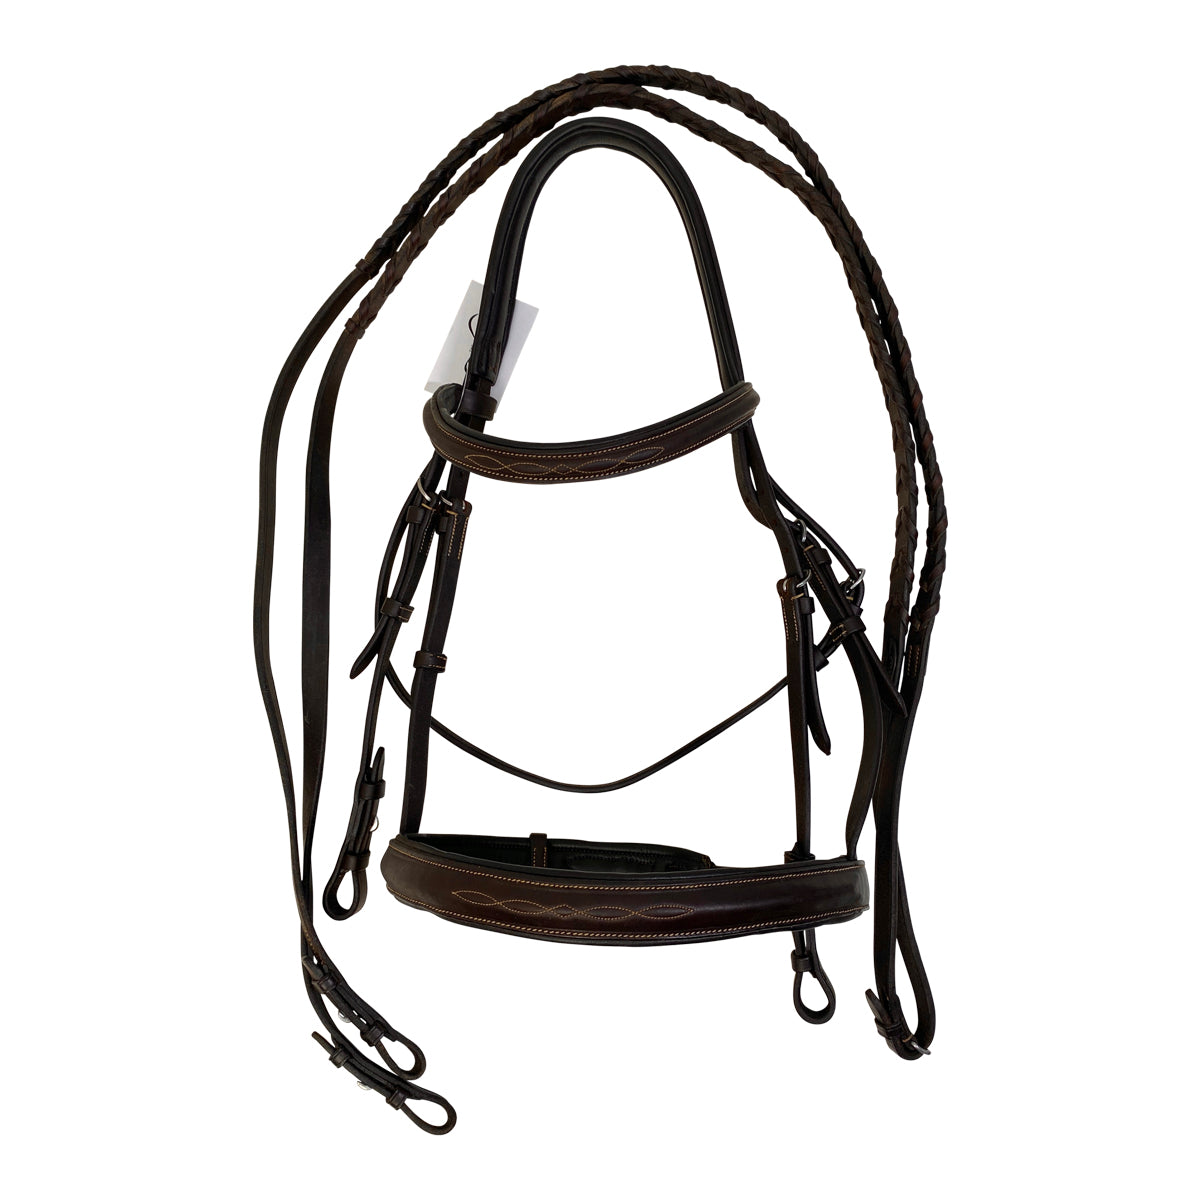 Ovation Classic 'Fancy Stitched Wide Nose Comfort Crown' Bridle in Brown